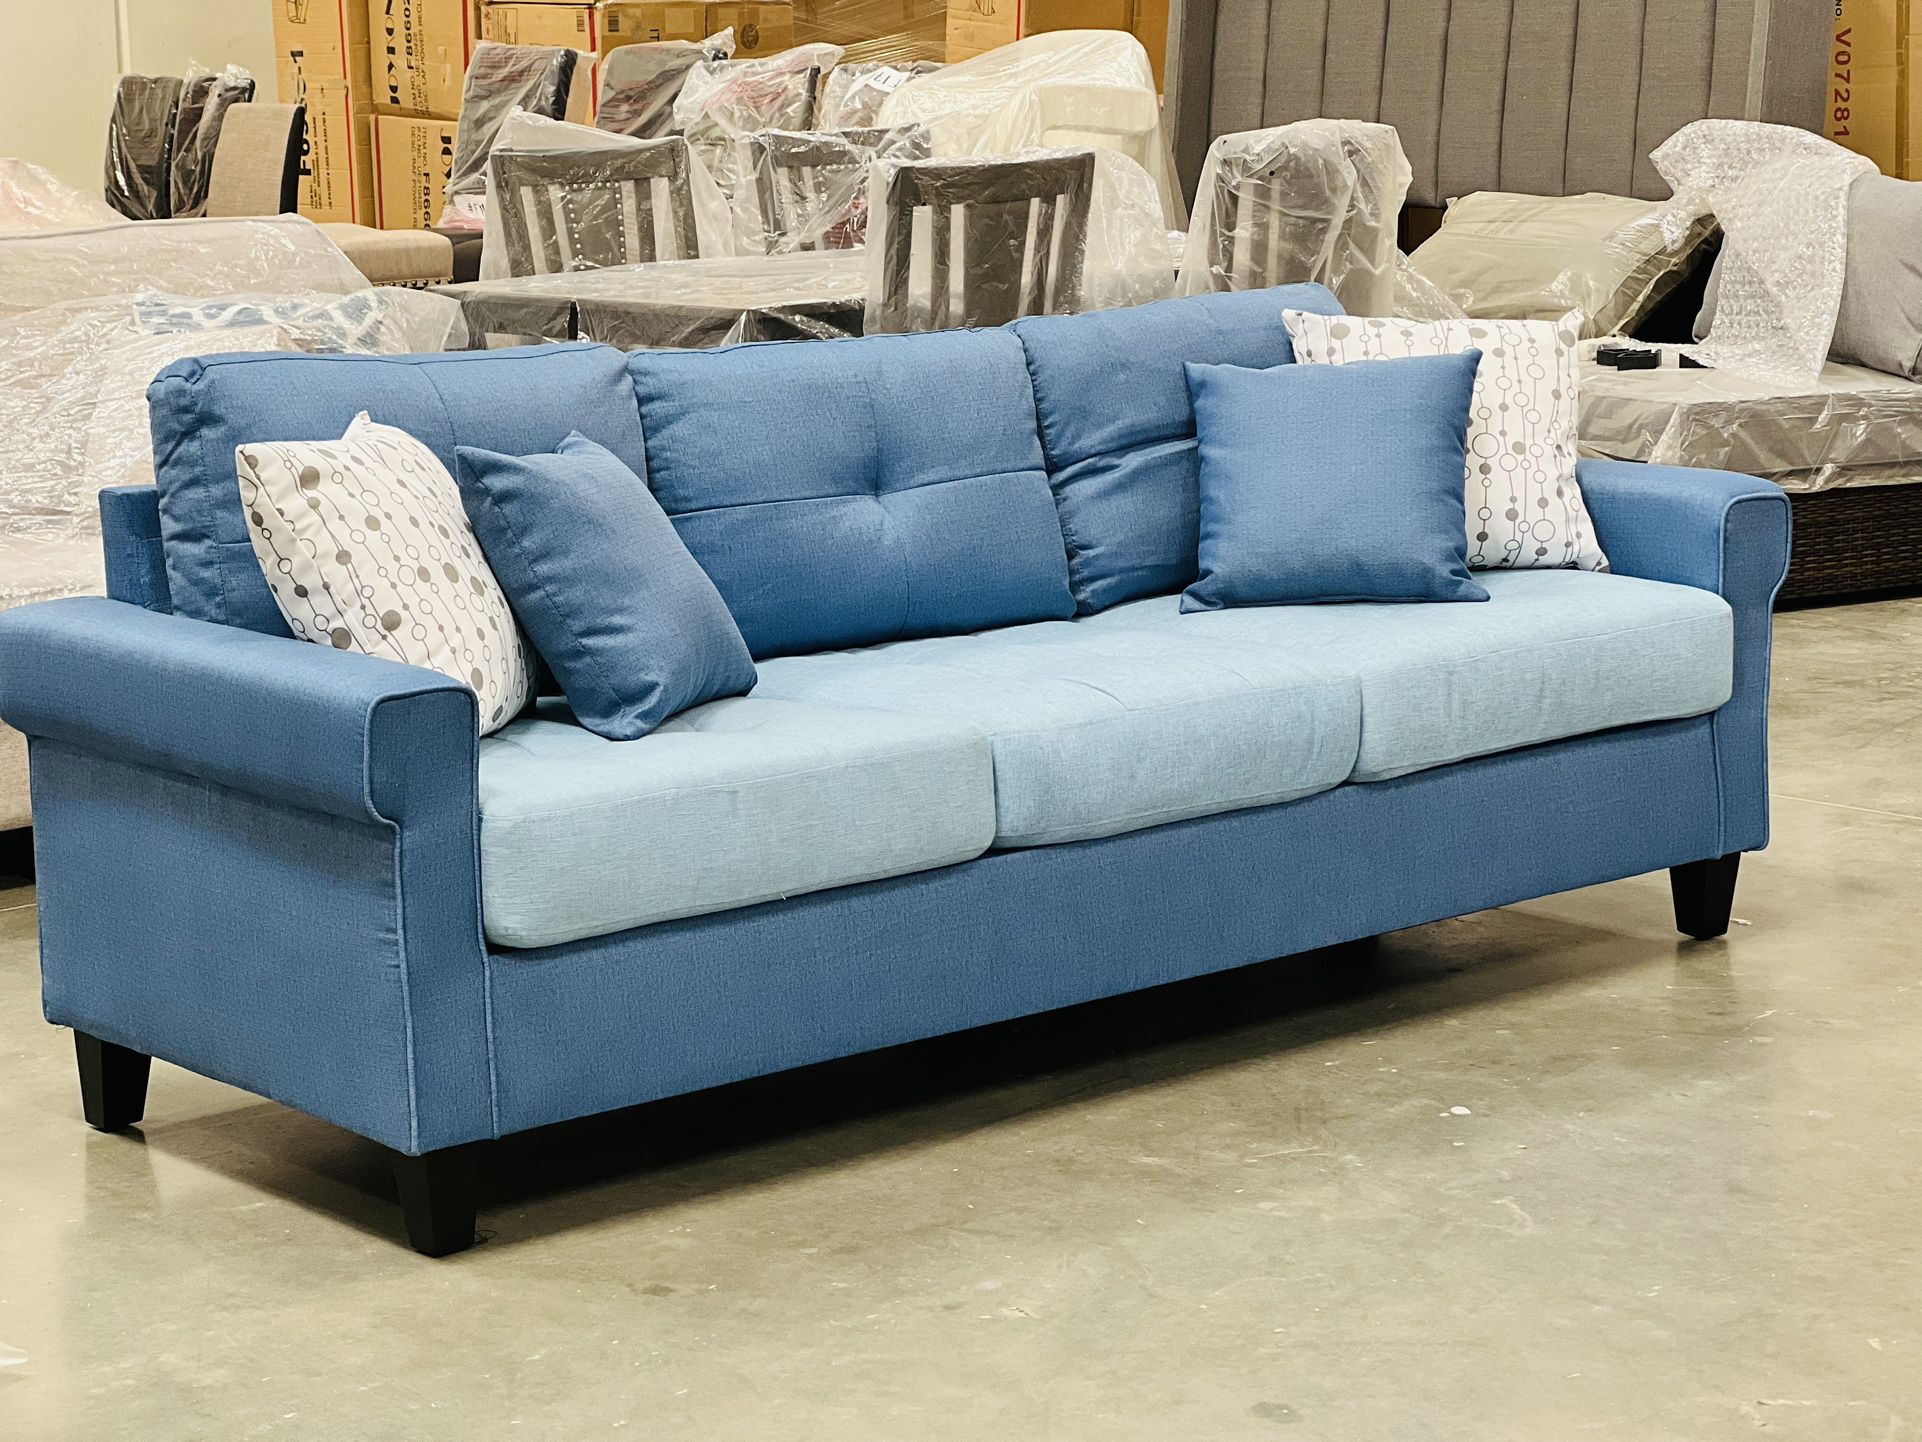 Closeout Deal! Blue Sofa, Sofa Couch, Couch, Small Living Room Sofa, Sofa, Upholstered Sofa, Game room Sofa, 